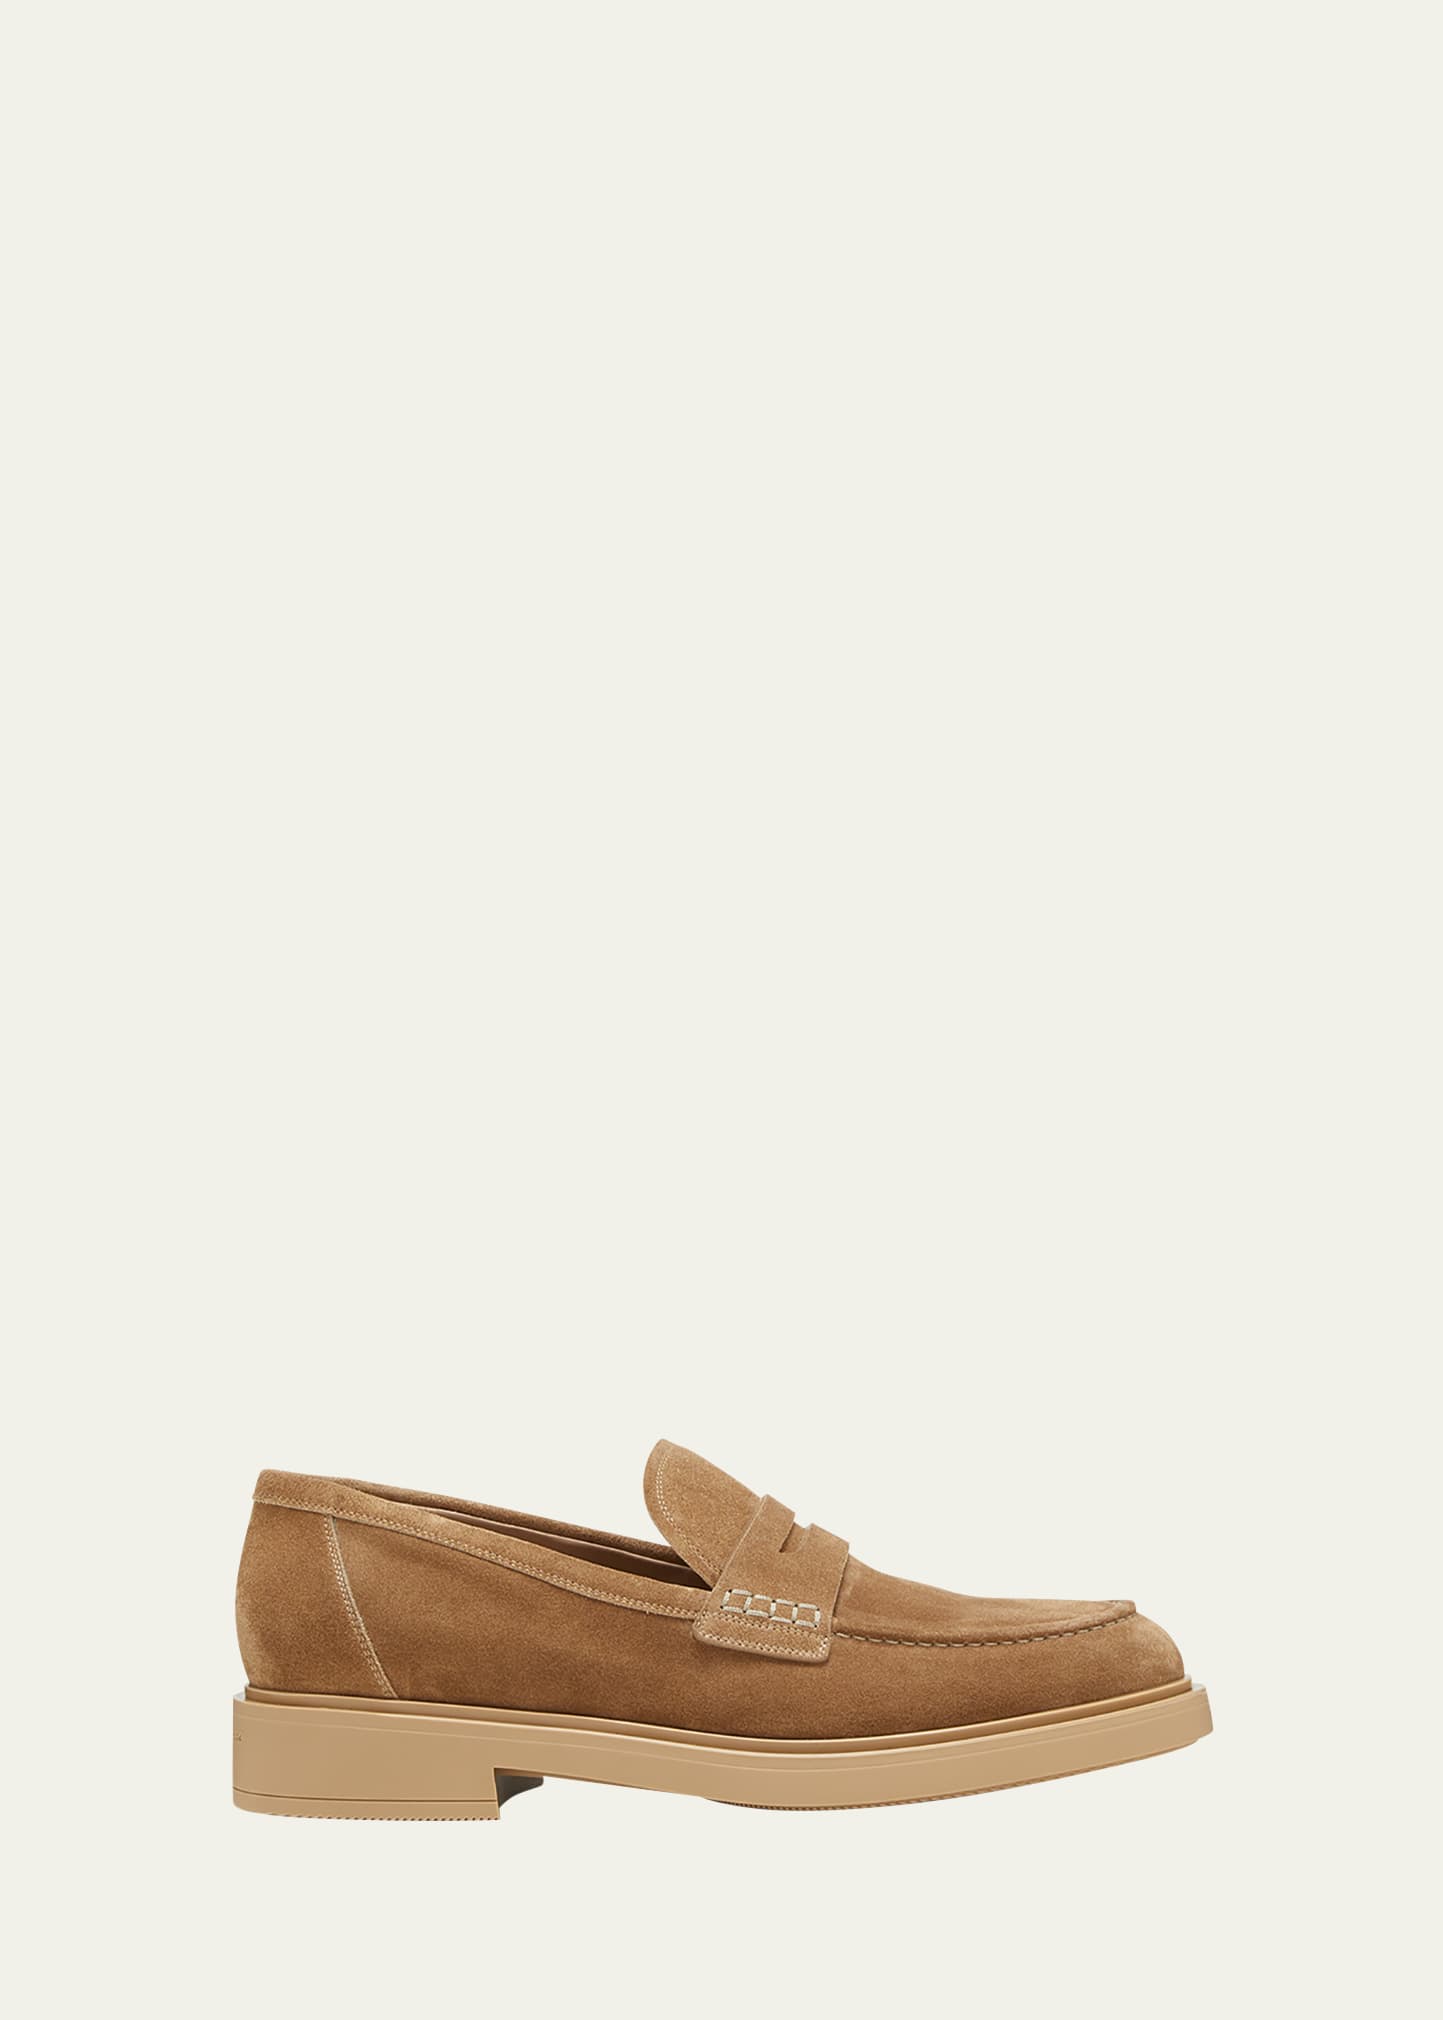 GIANVITO ROSSI MEN'S HARRIS SUEDE PENNY LOAFERS